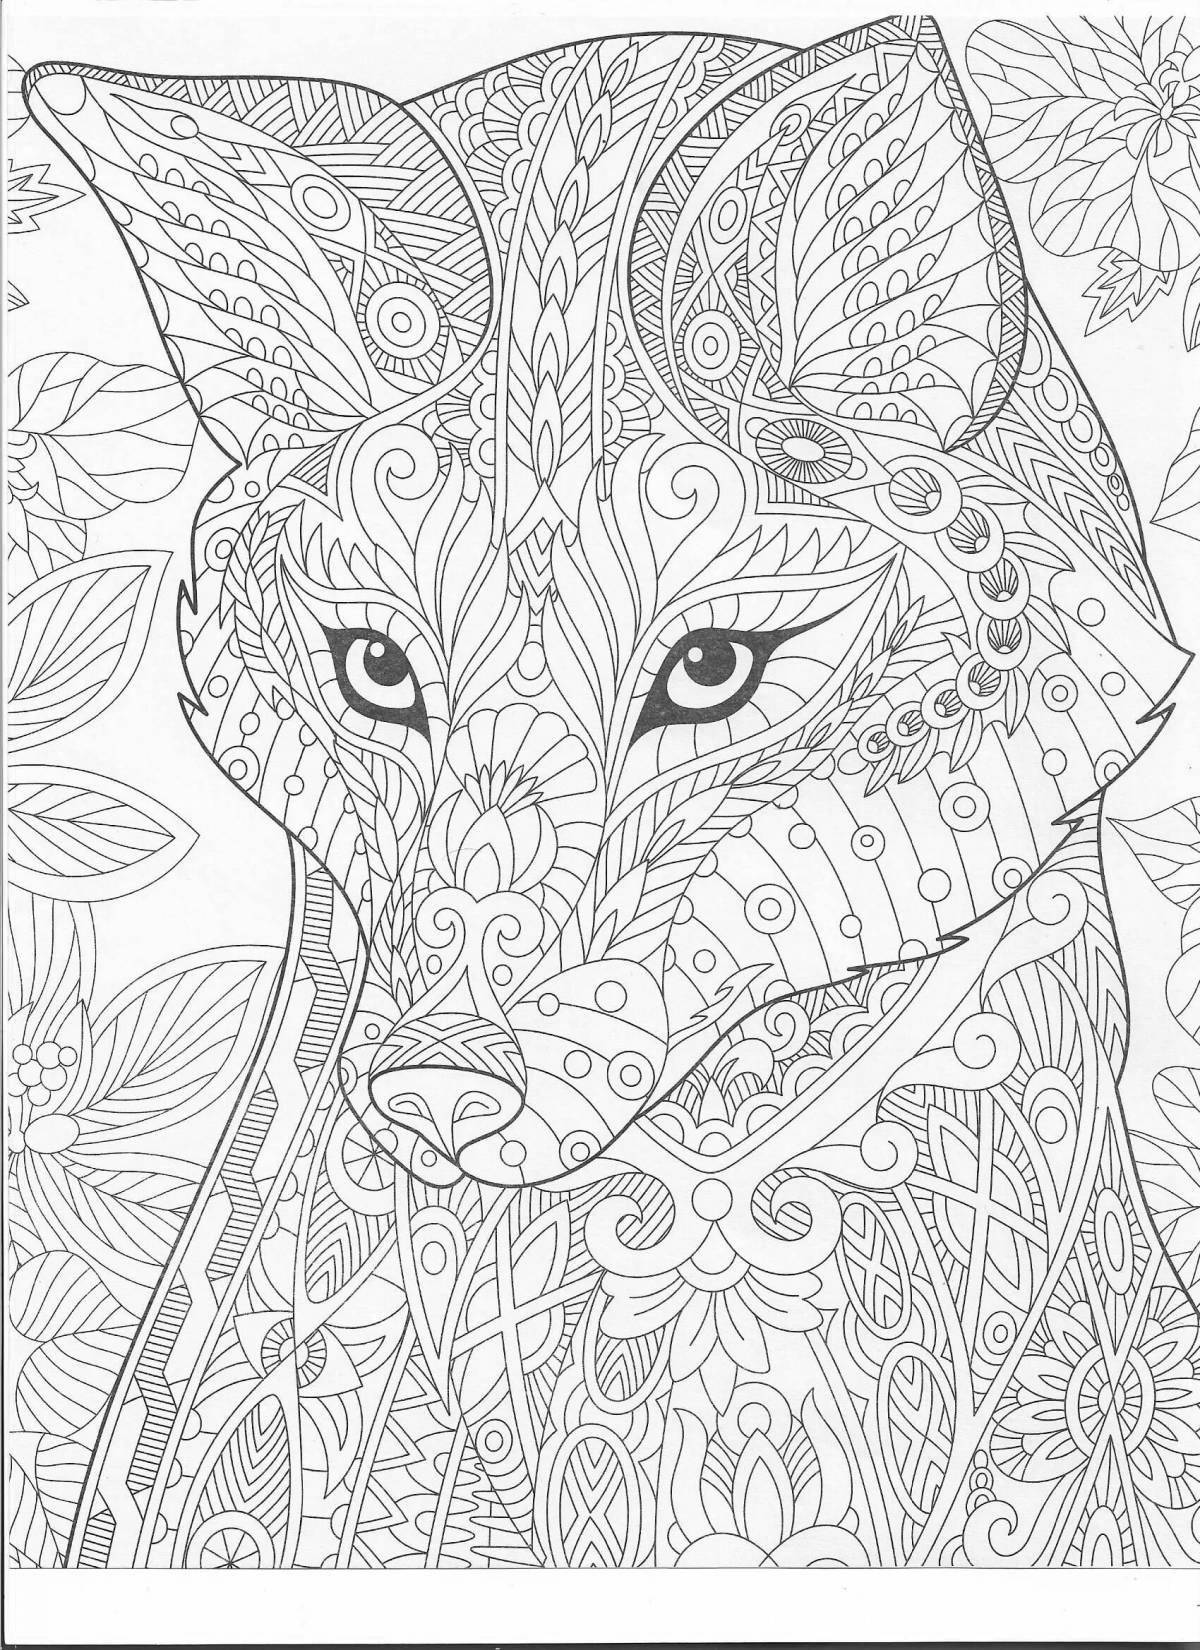 Dazzling coloring for girls 9 years old - very beautiful animals